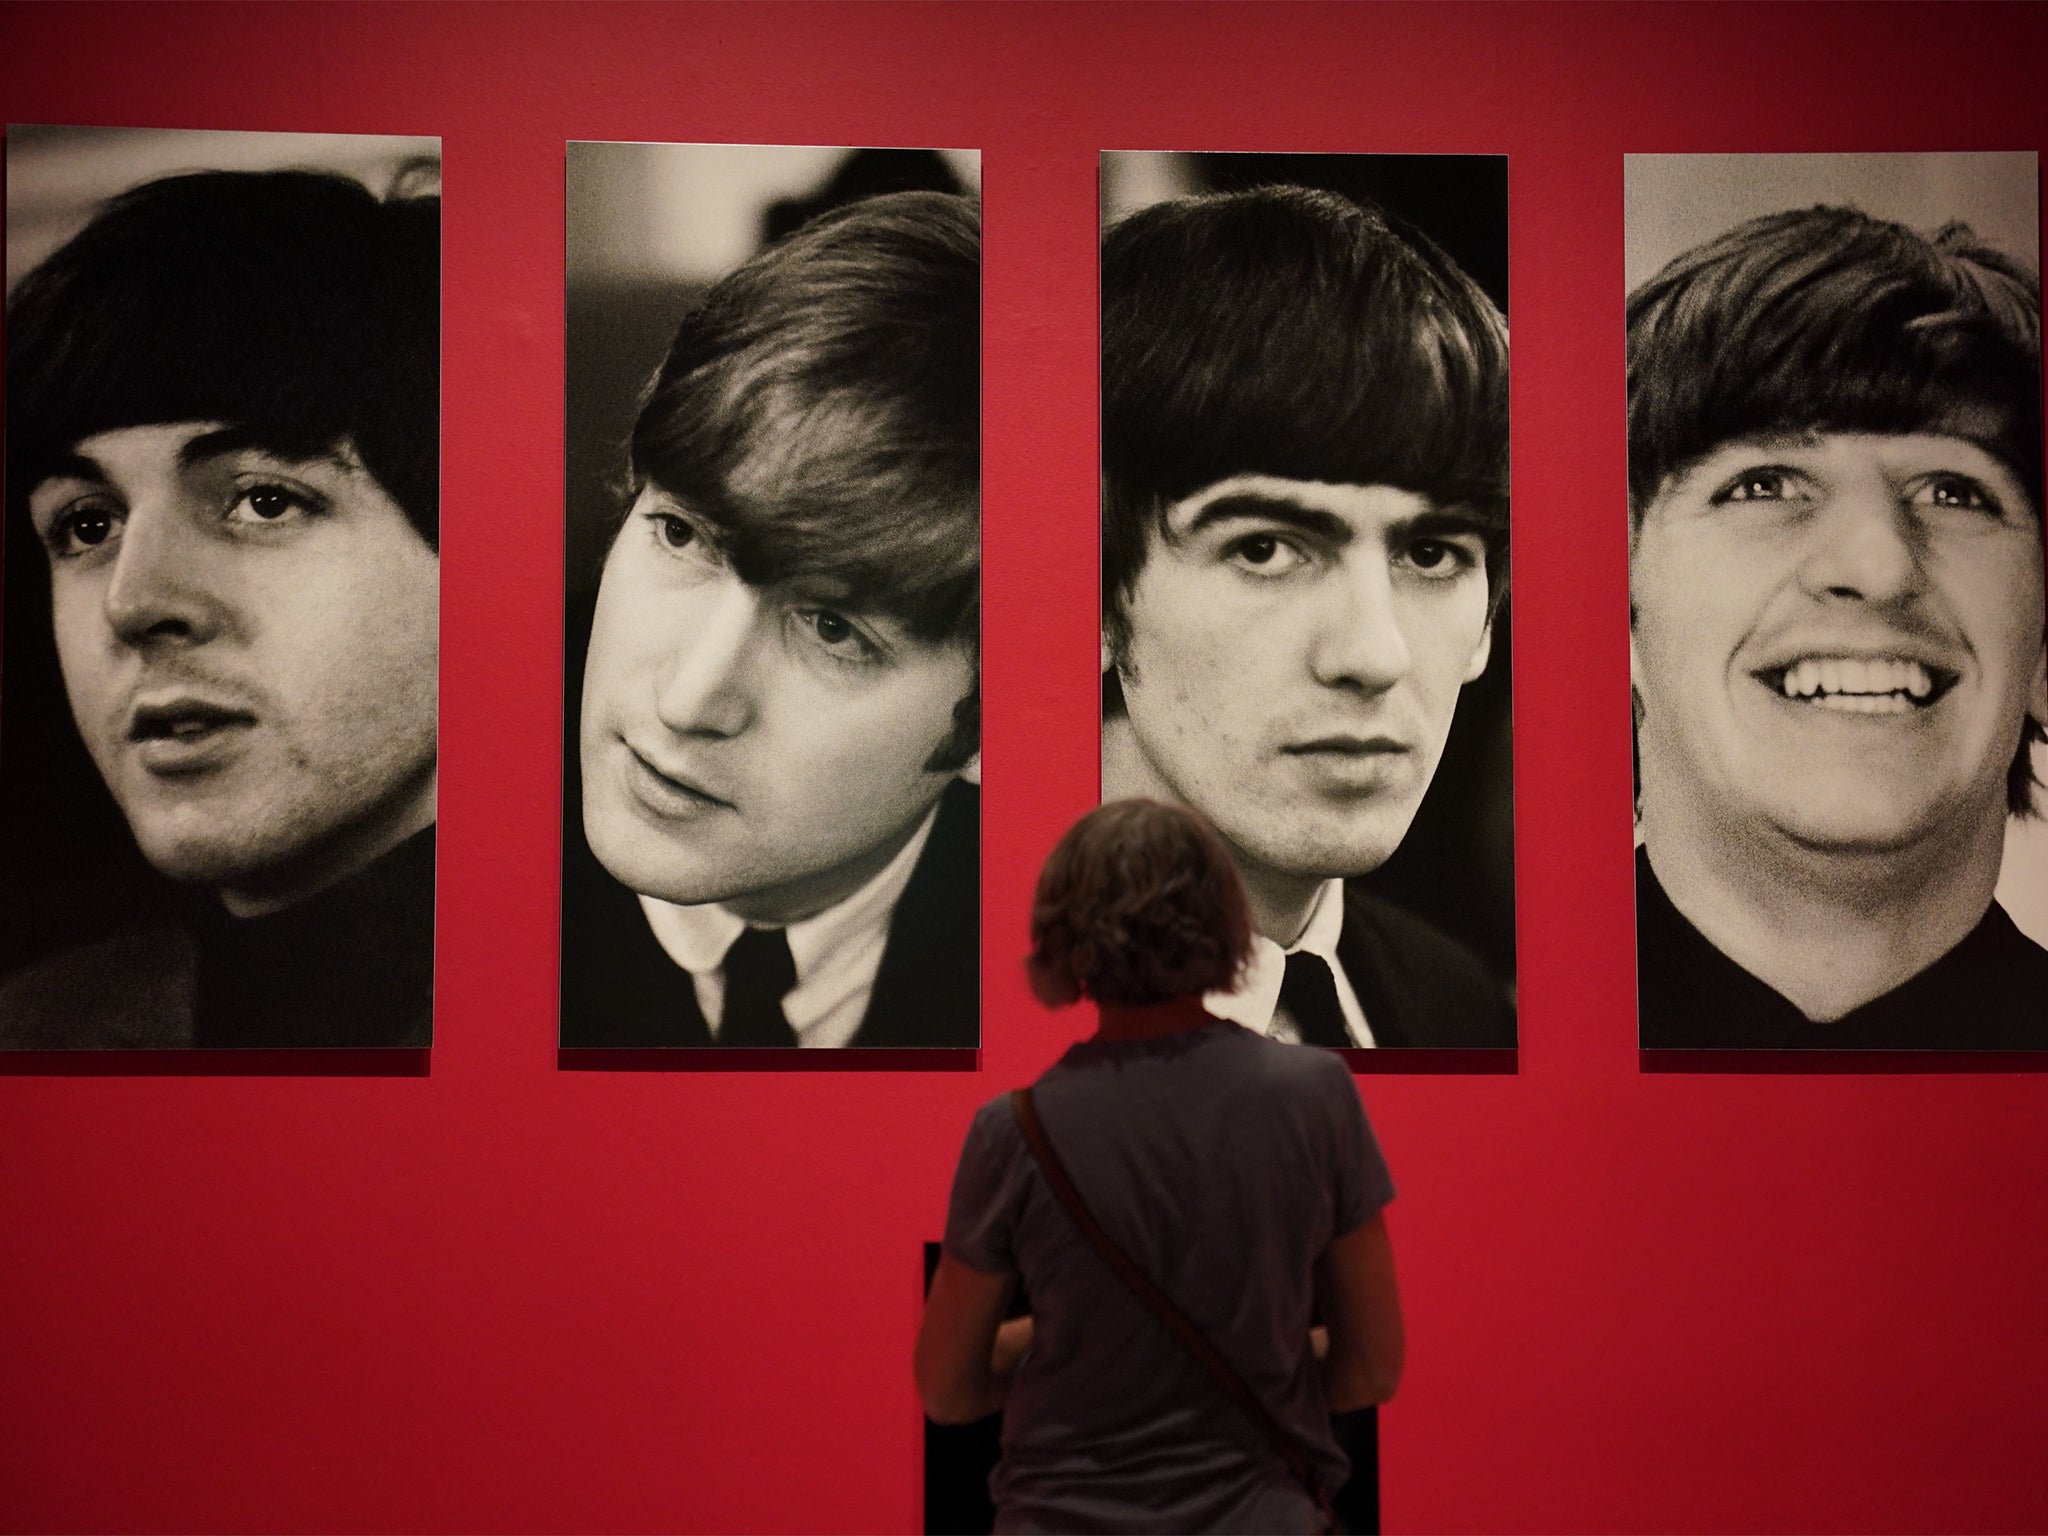 The new Sir Paul McCartney exhibition, Photographs 1963-64: Eyes of the Storm, is at the National Portrait Gallery in London